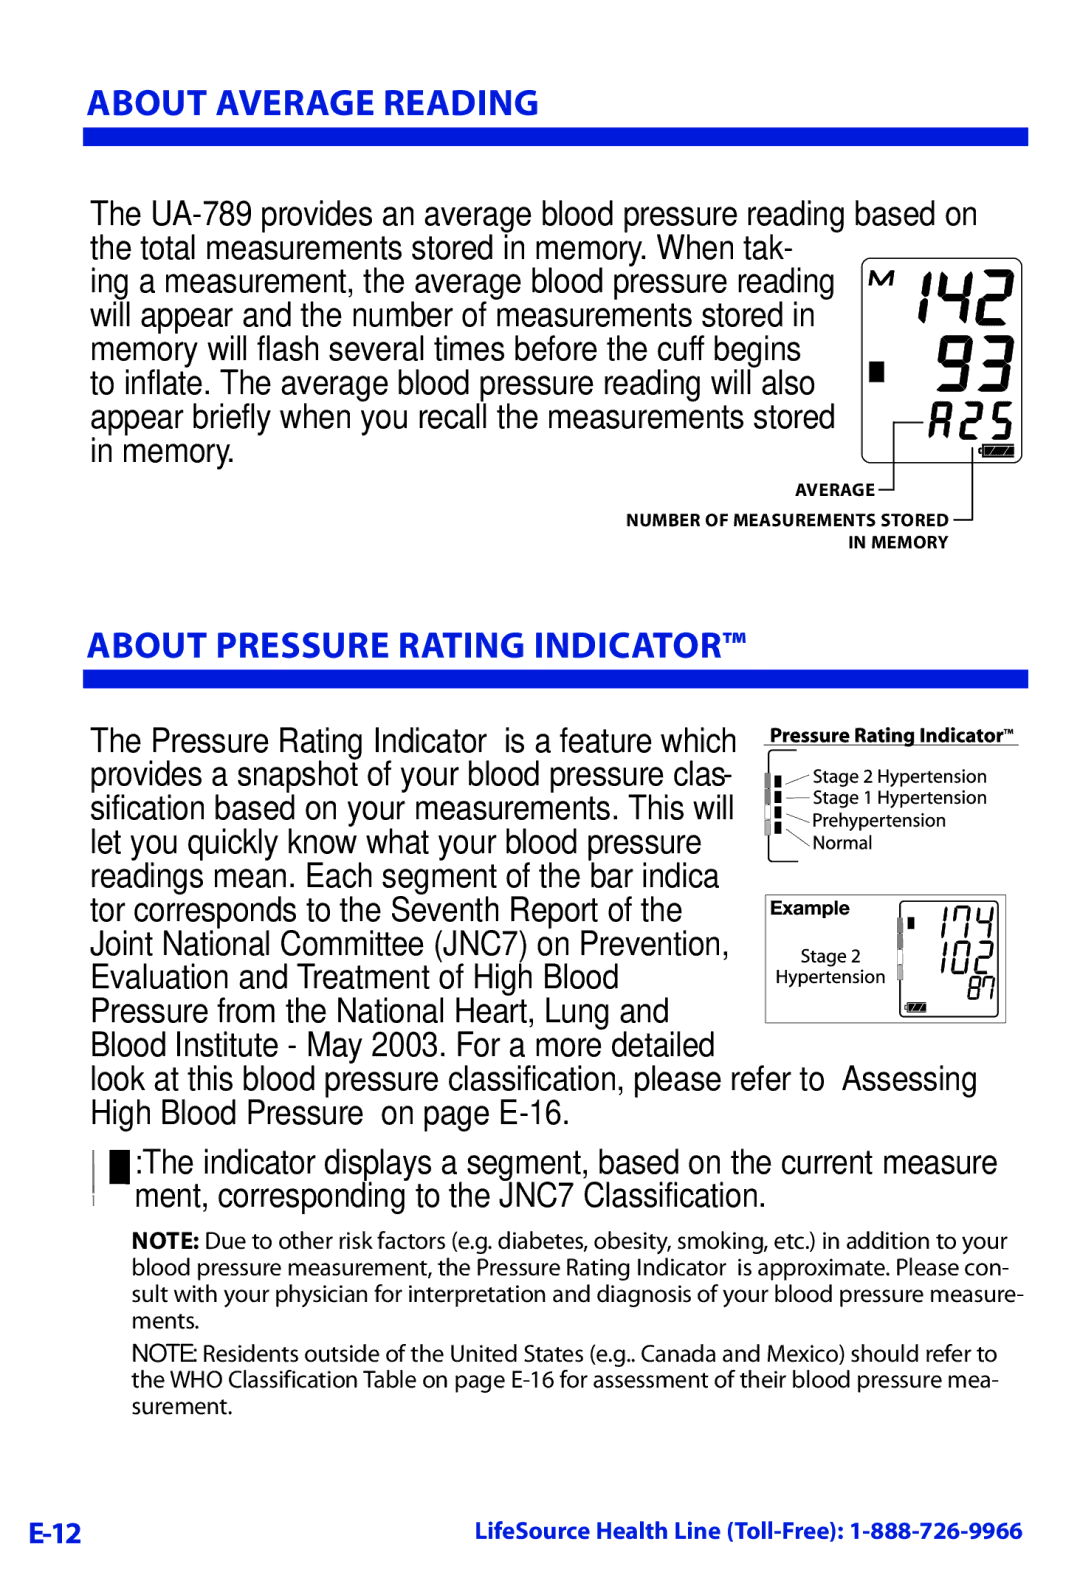 LifeSource UA-789 manual About Average Reading, About Pressure Rating Indicator 